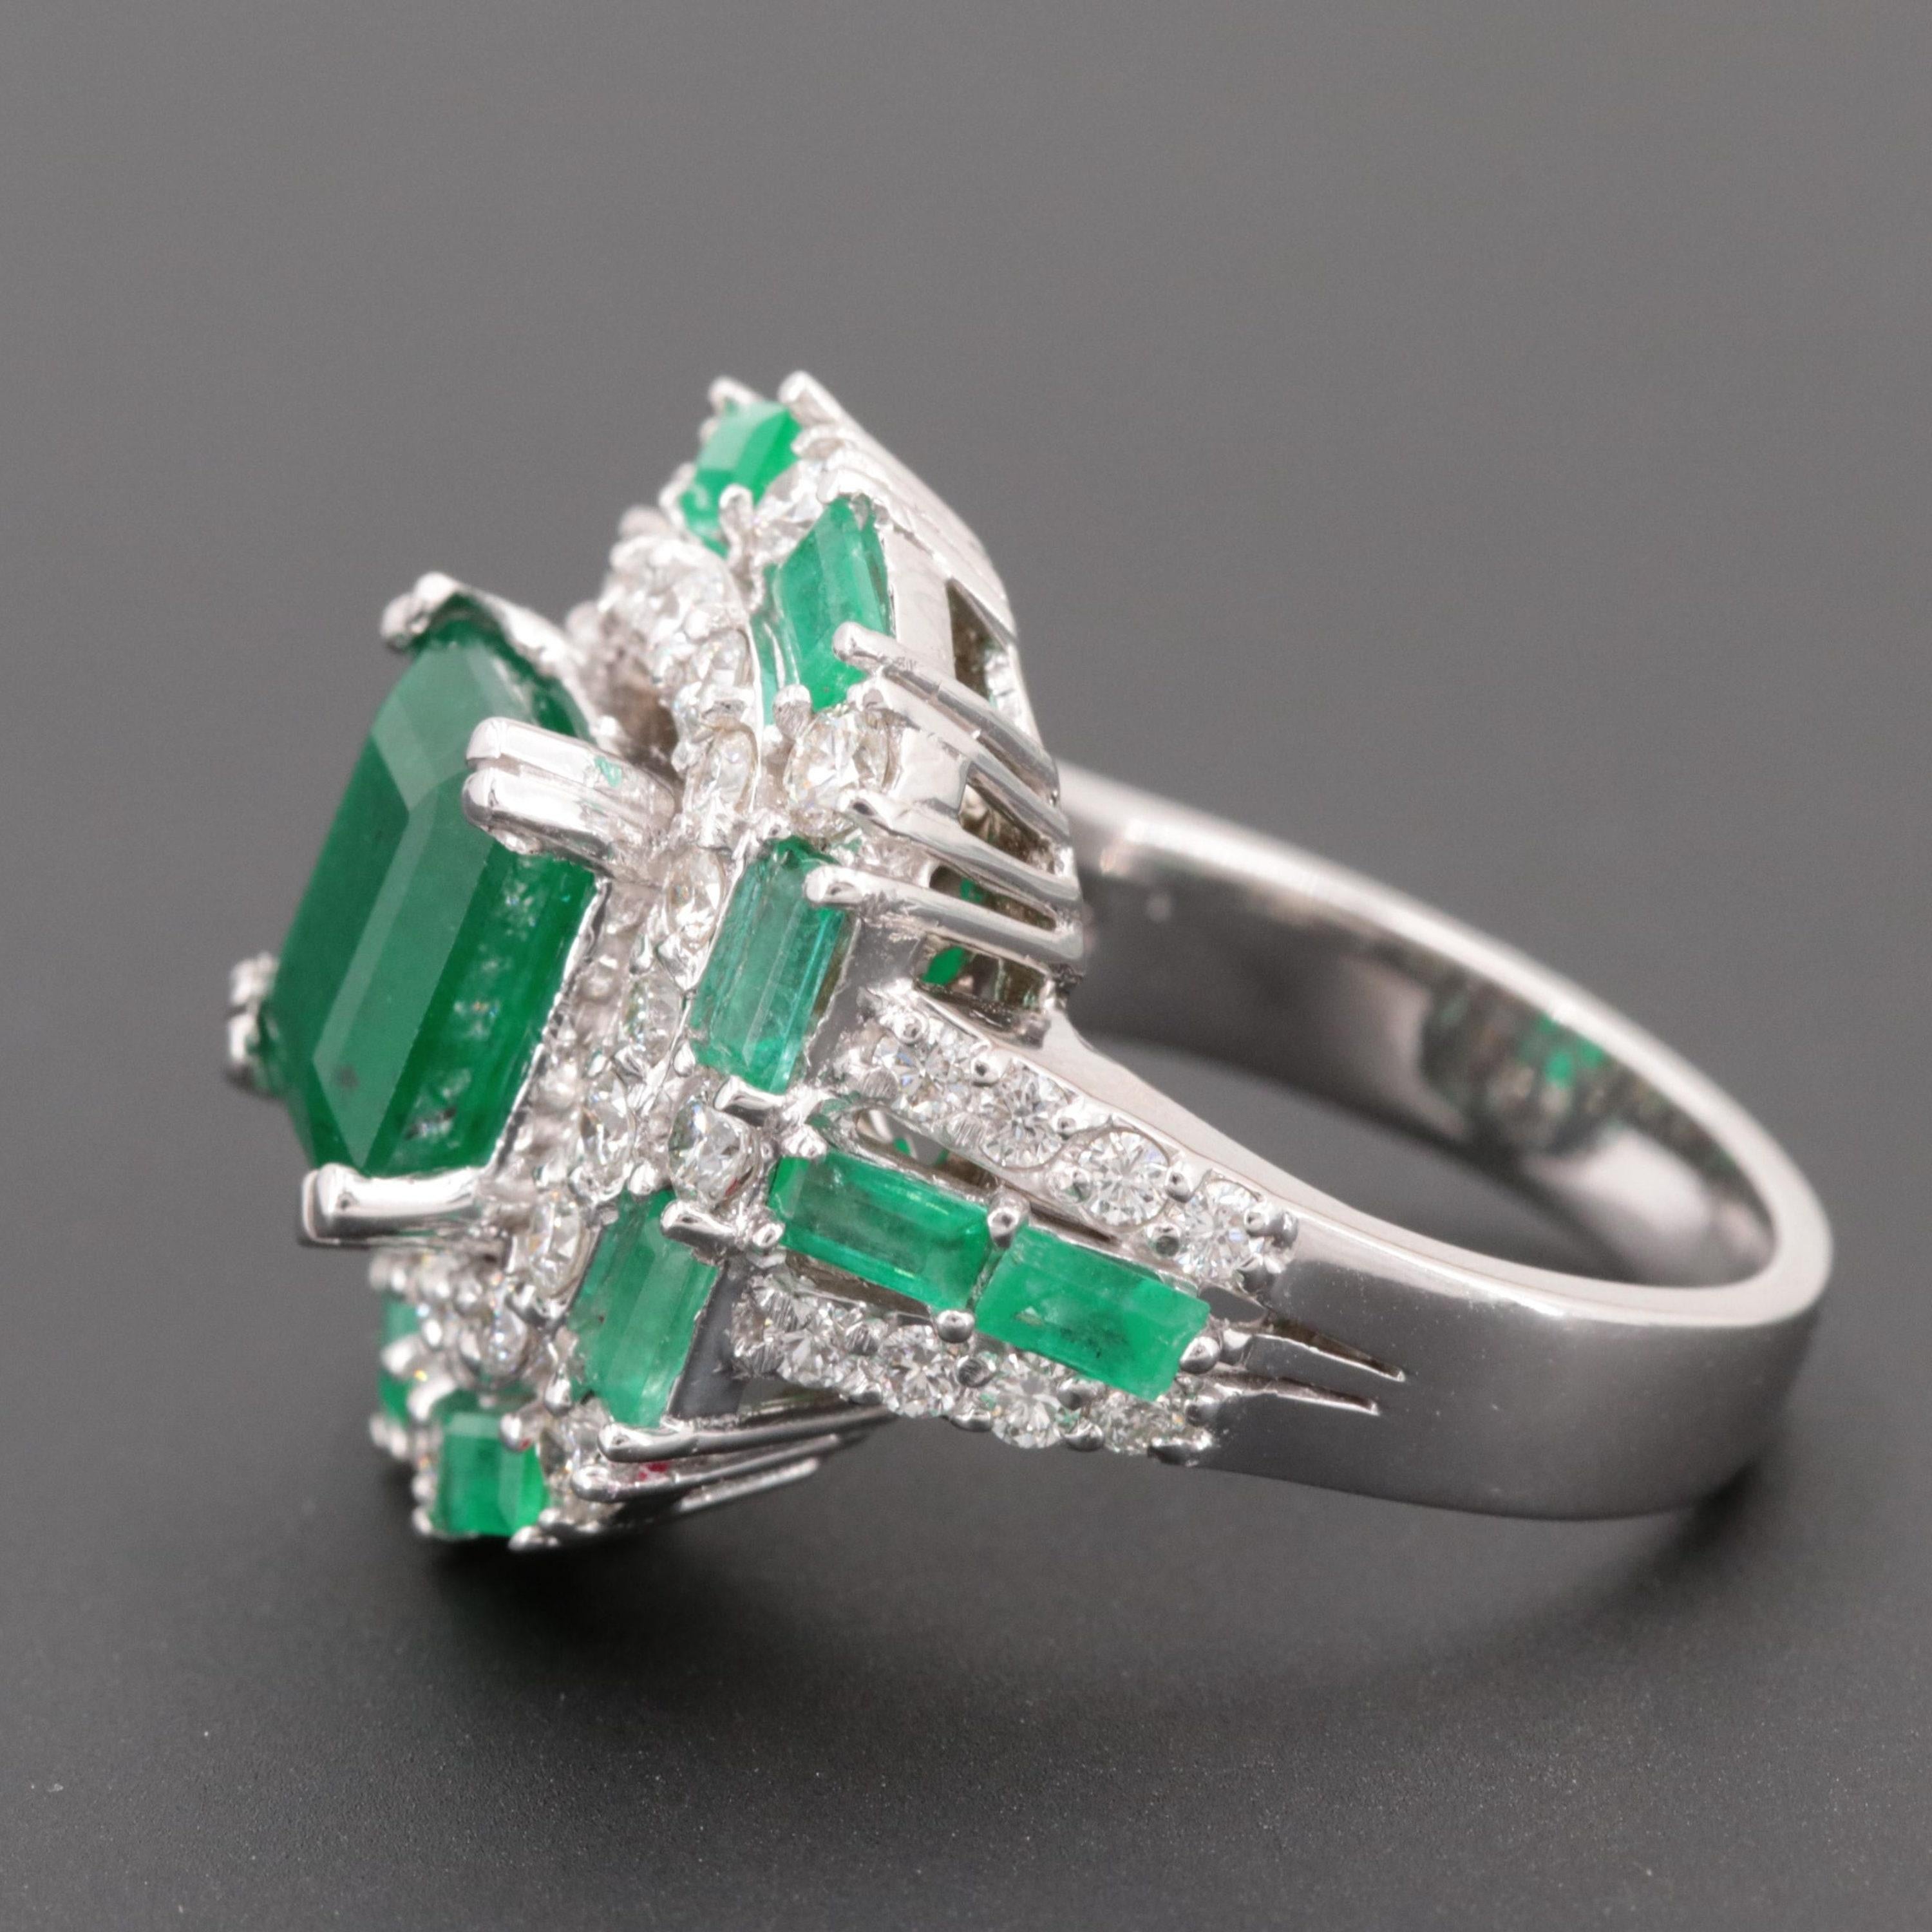 For Sale:  18K Gold 3 CT Natural Emerald and Diamond Antique Art Deco Style Engagement Ring 5